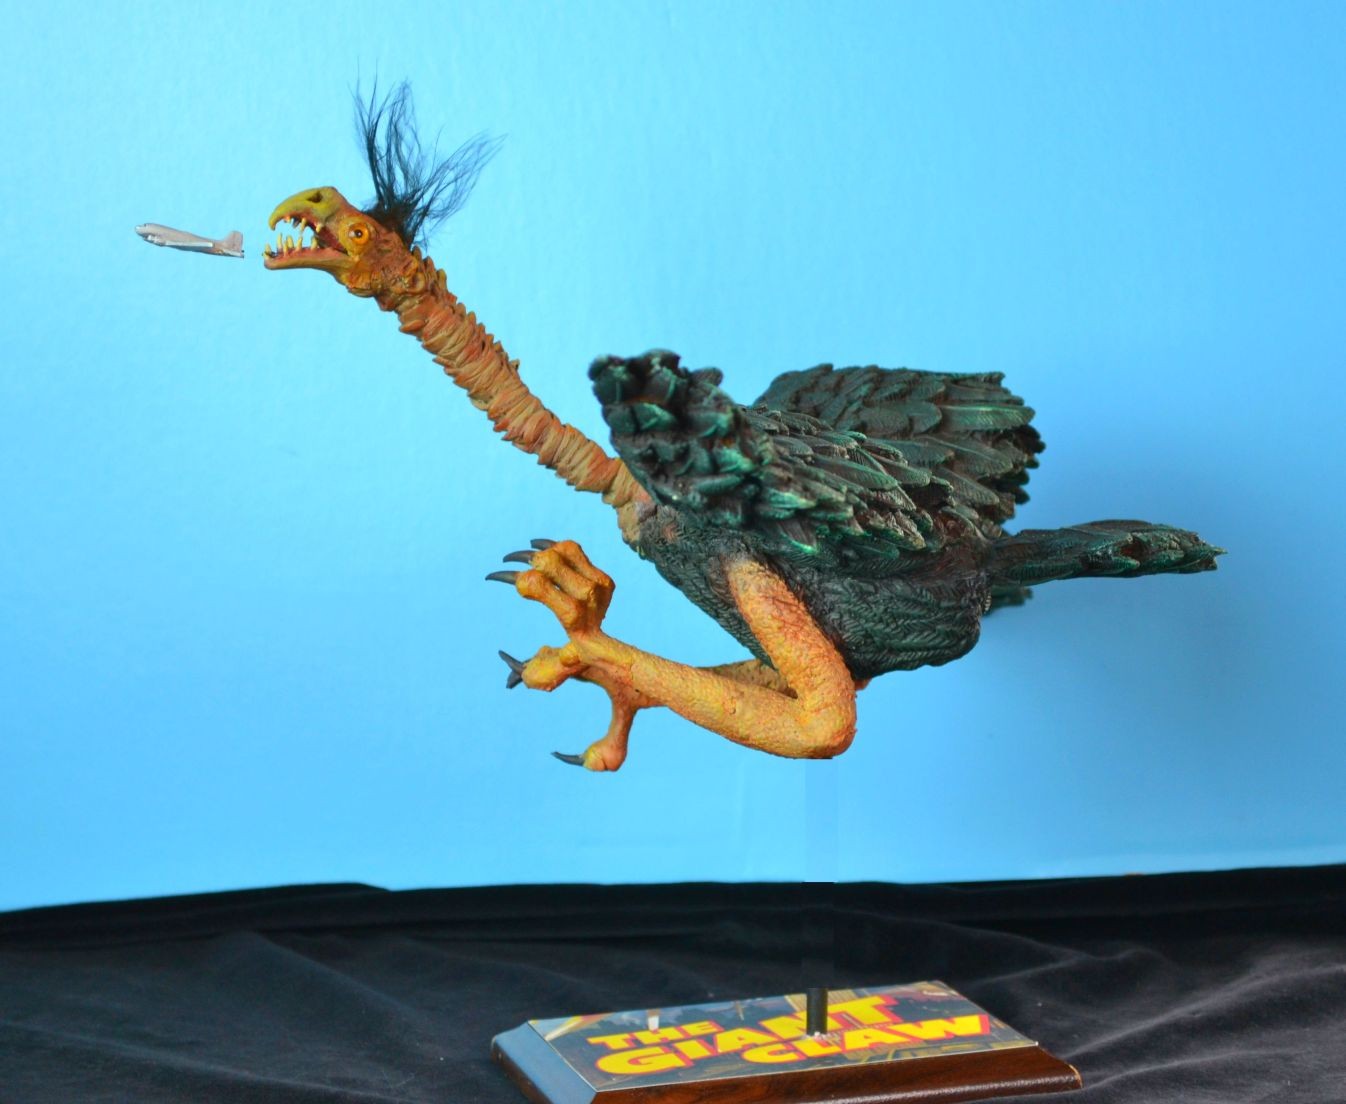 Giant Claw Flying Resin Model Kit by Monster Fun - Click Image to Close